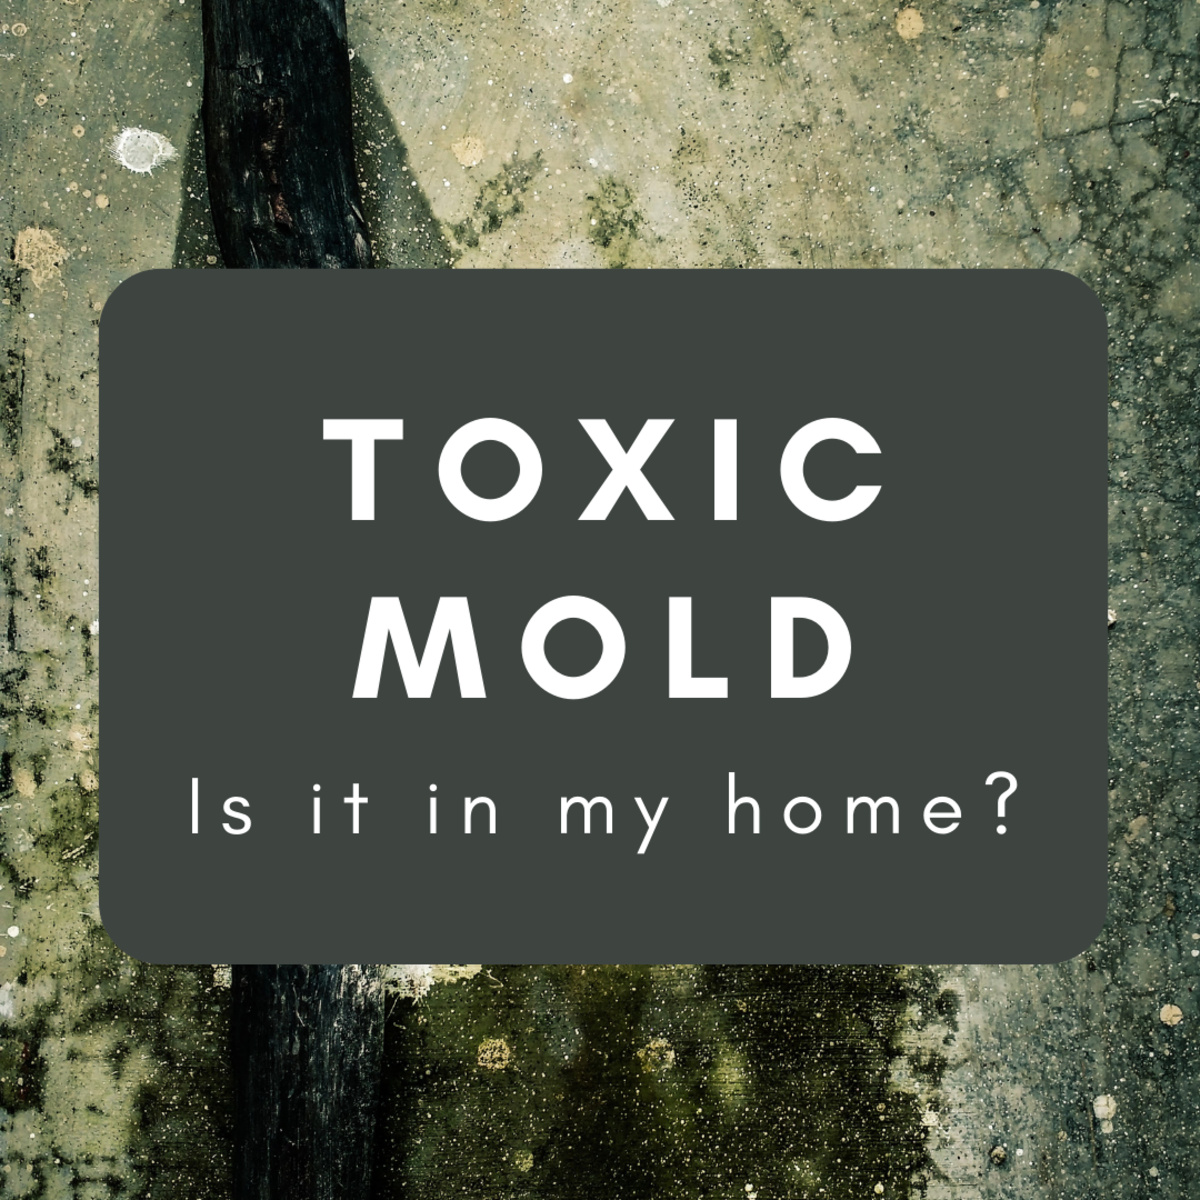 Does My Home Contain Toxic Mold? Detection and Remediation Tips